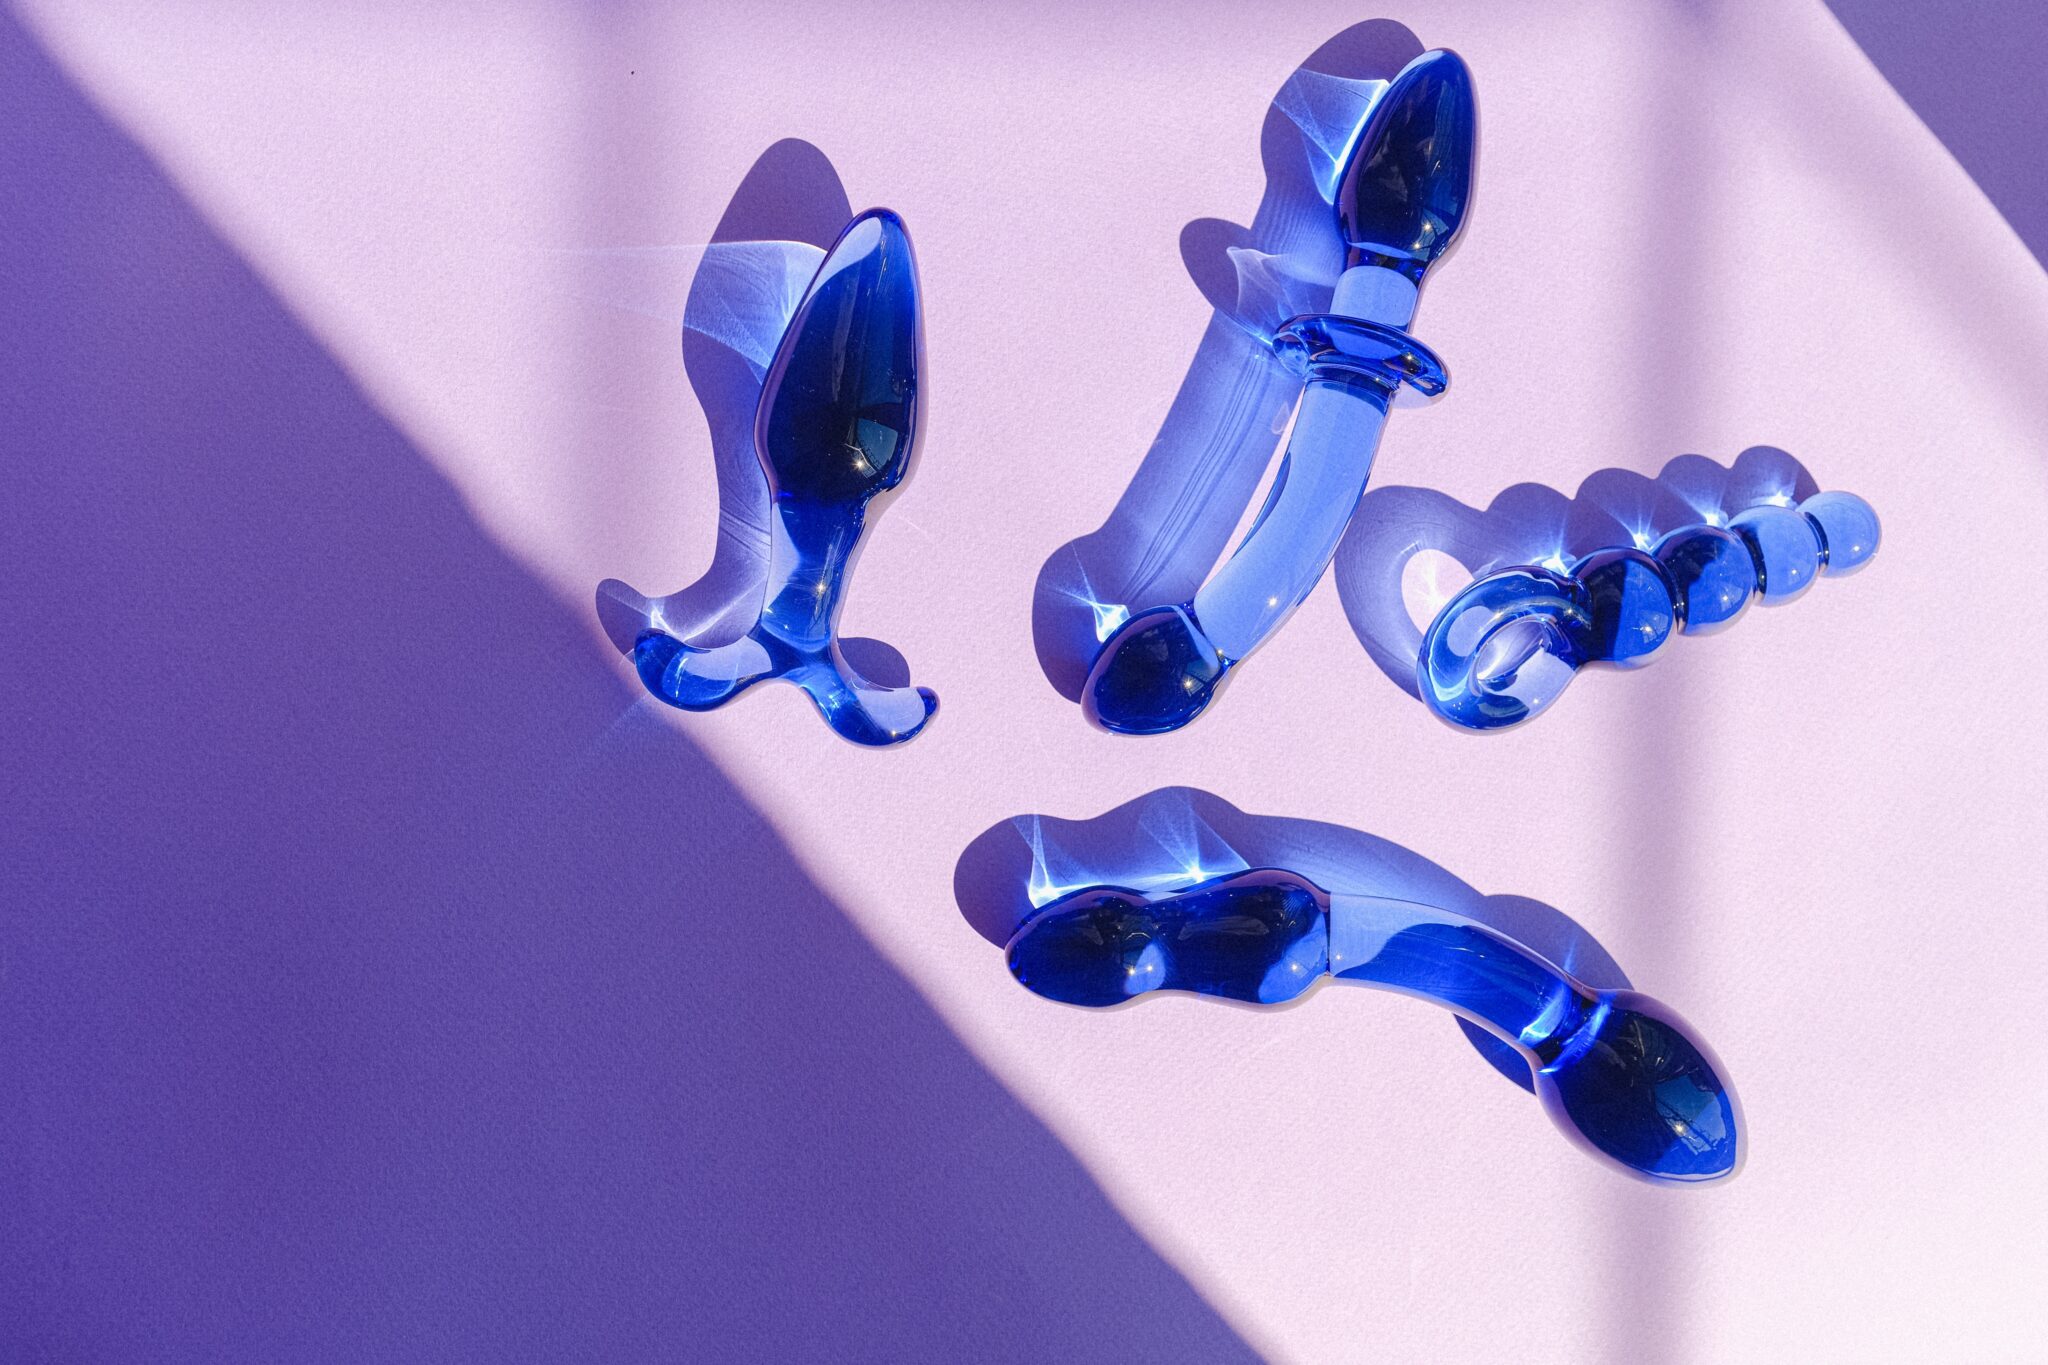 Blue glass anal toys reflecting sunlight.